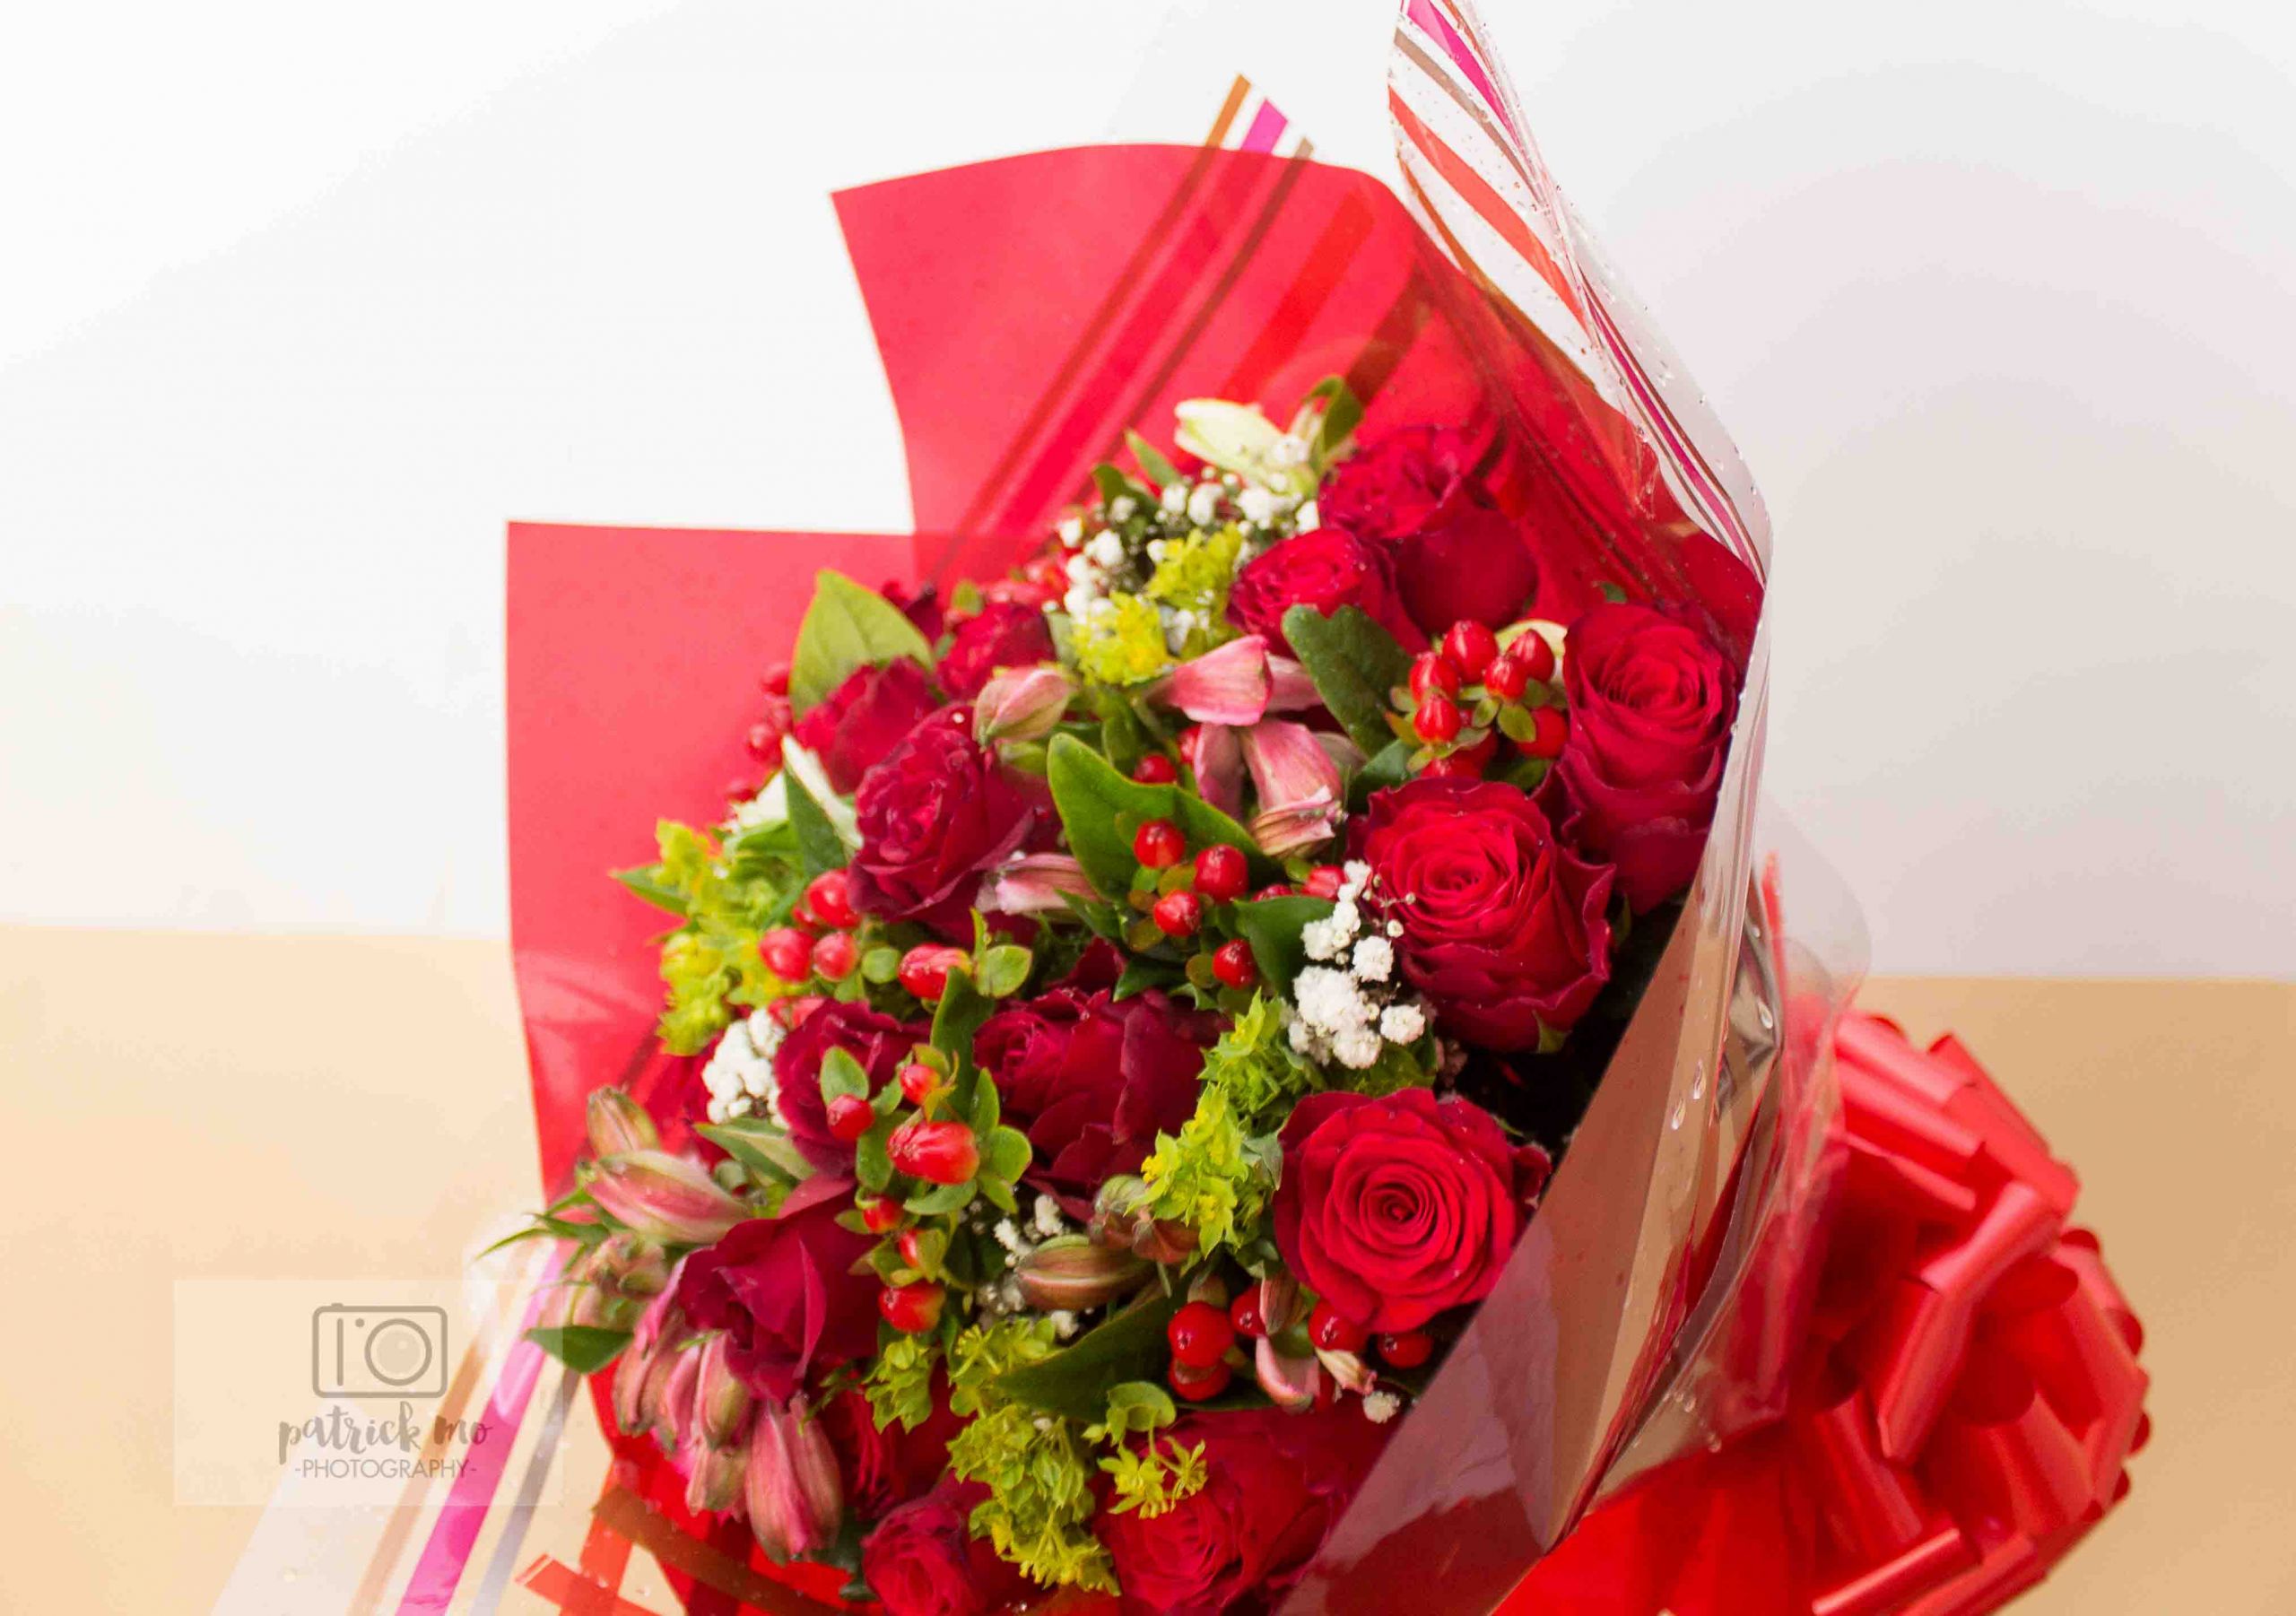 Romantic Valentines Day Gifts For Her
 What Are The Best Valentine s Day Gifts for Her Techicy